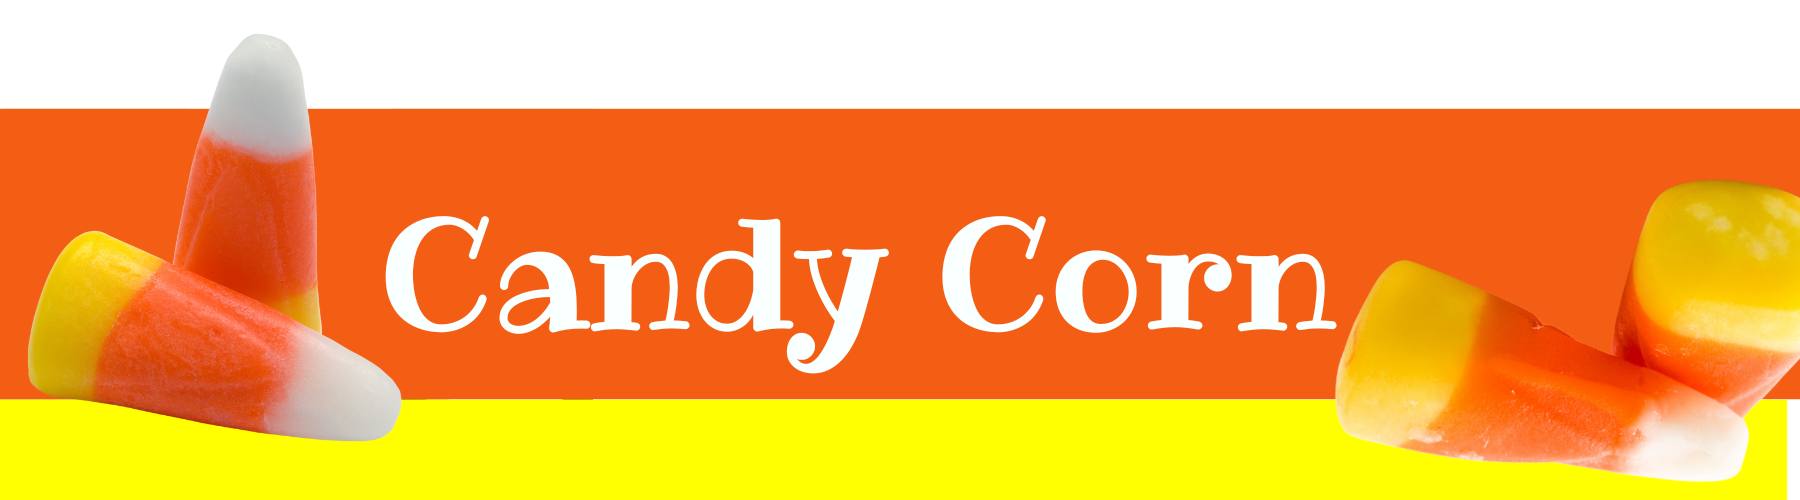 decorate with a candy corn theme